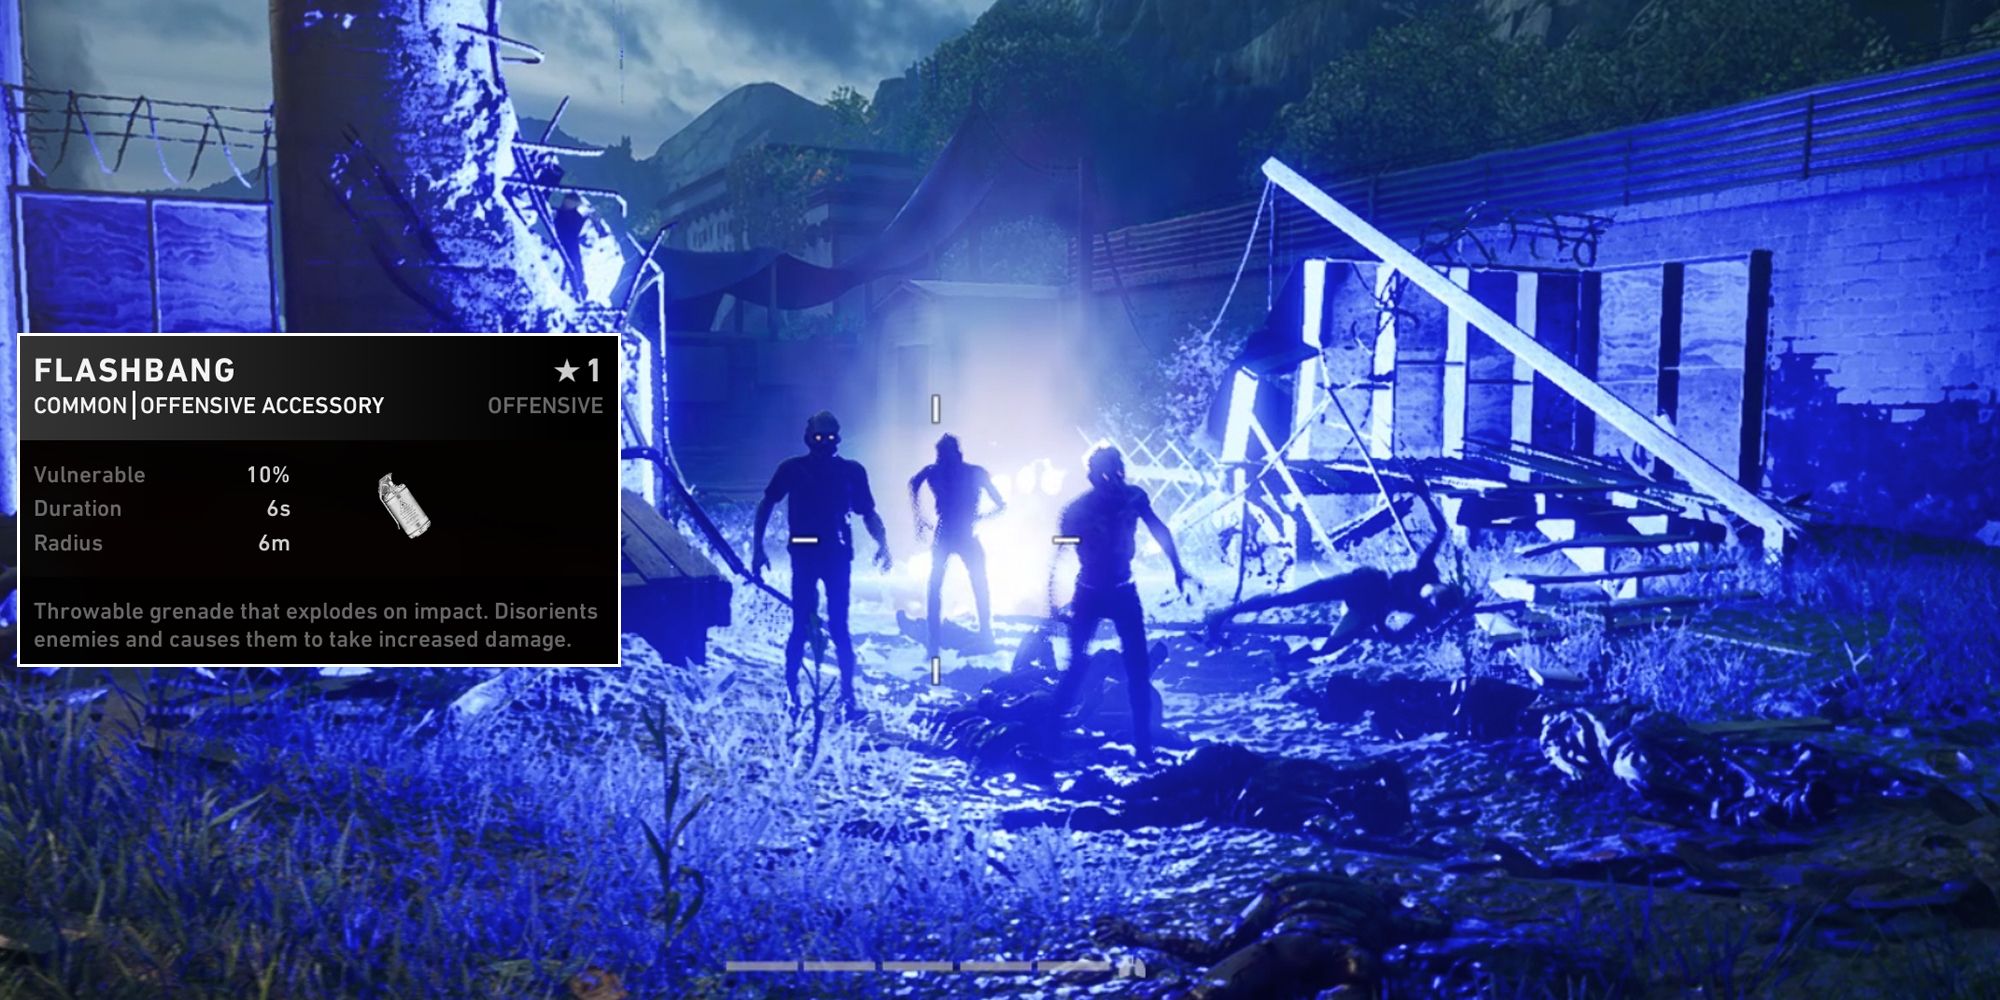 Back 4 Blood. Zombies stunned by flash grenade. Big blue beaming light on screen as well as flashbang details.